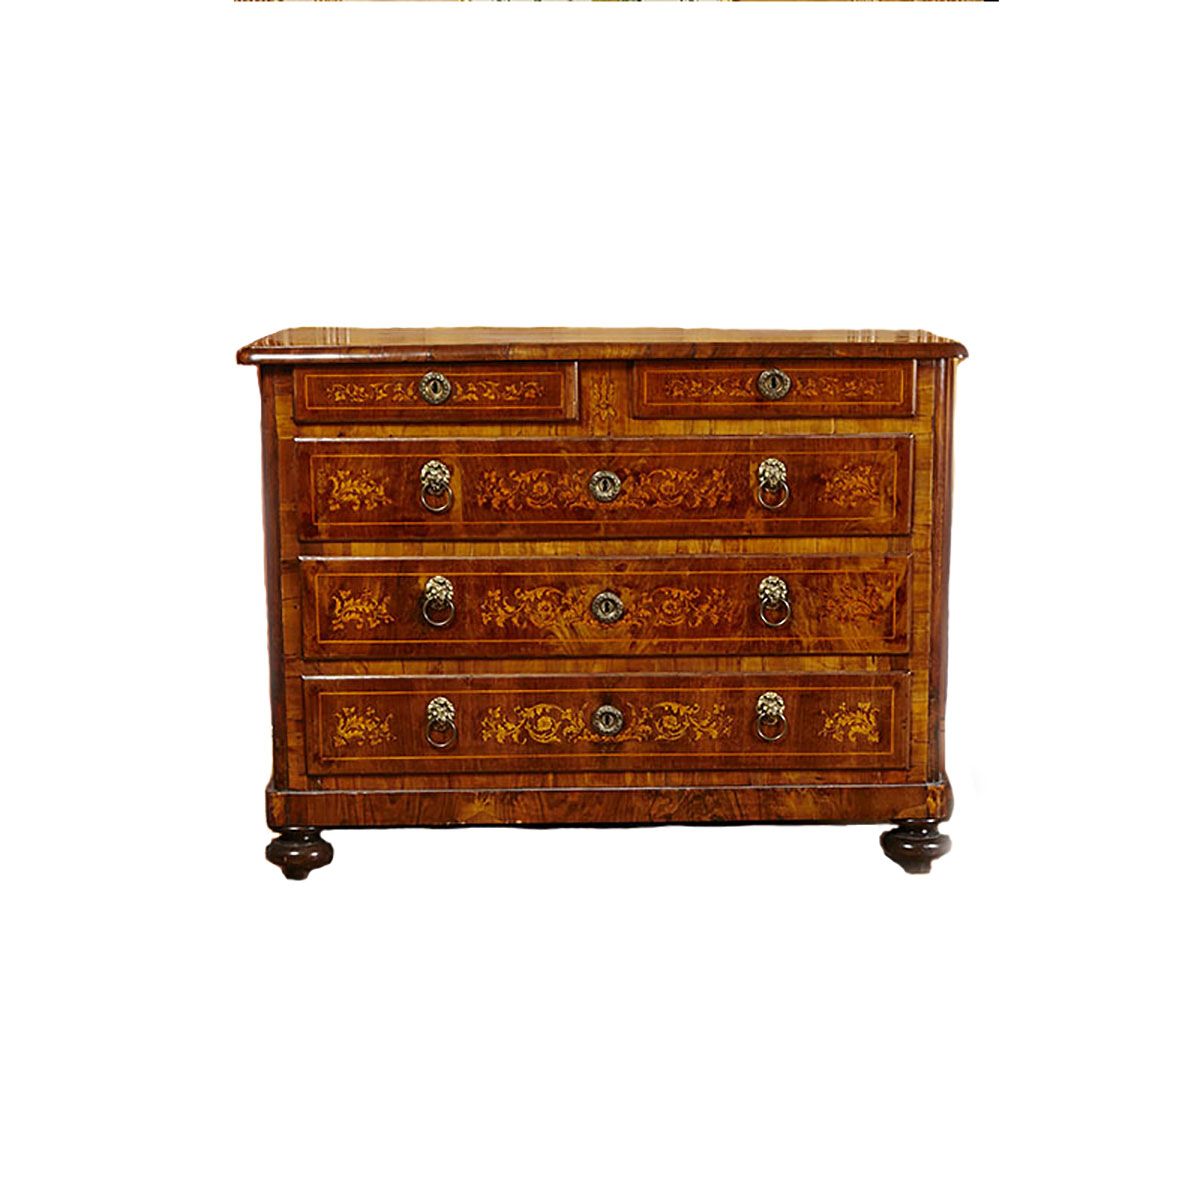 Italian Marquetry Commode, early 19th century